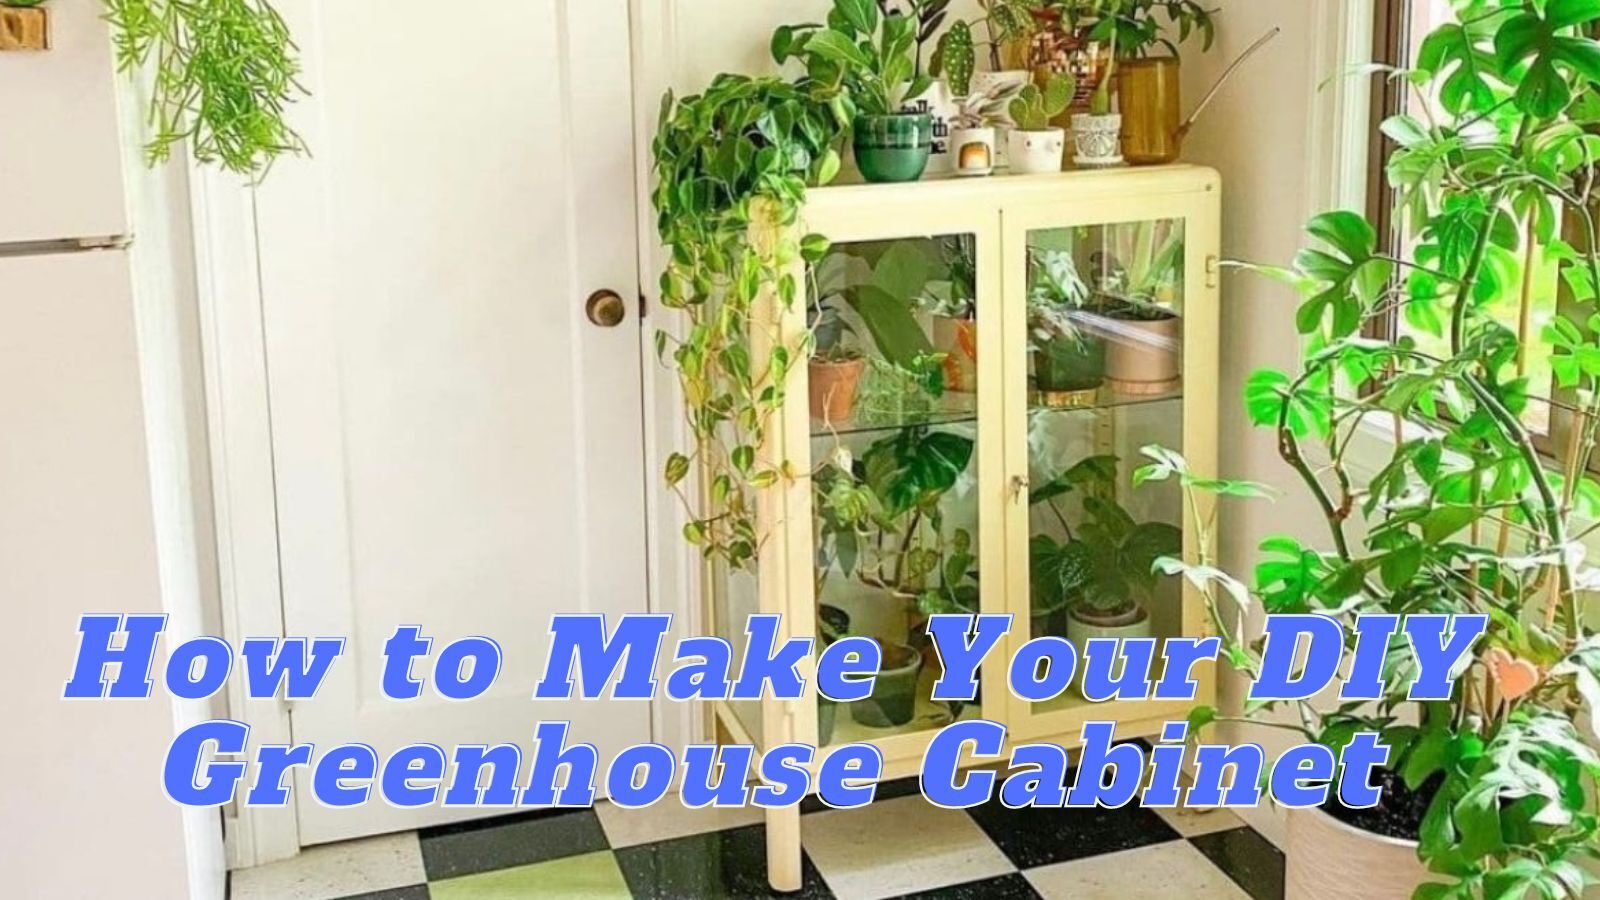 How to Make Your Own DIY Greenhouse Cabinet (in EASY 8 Steps)